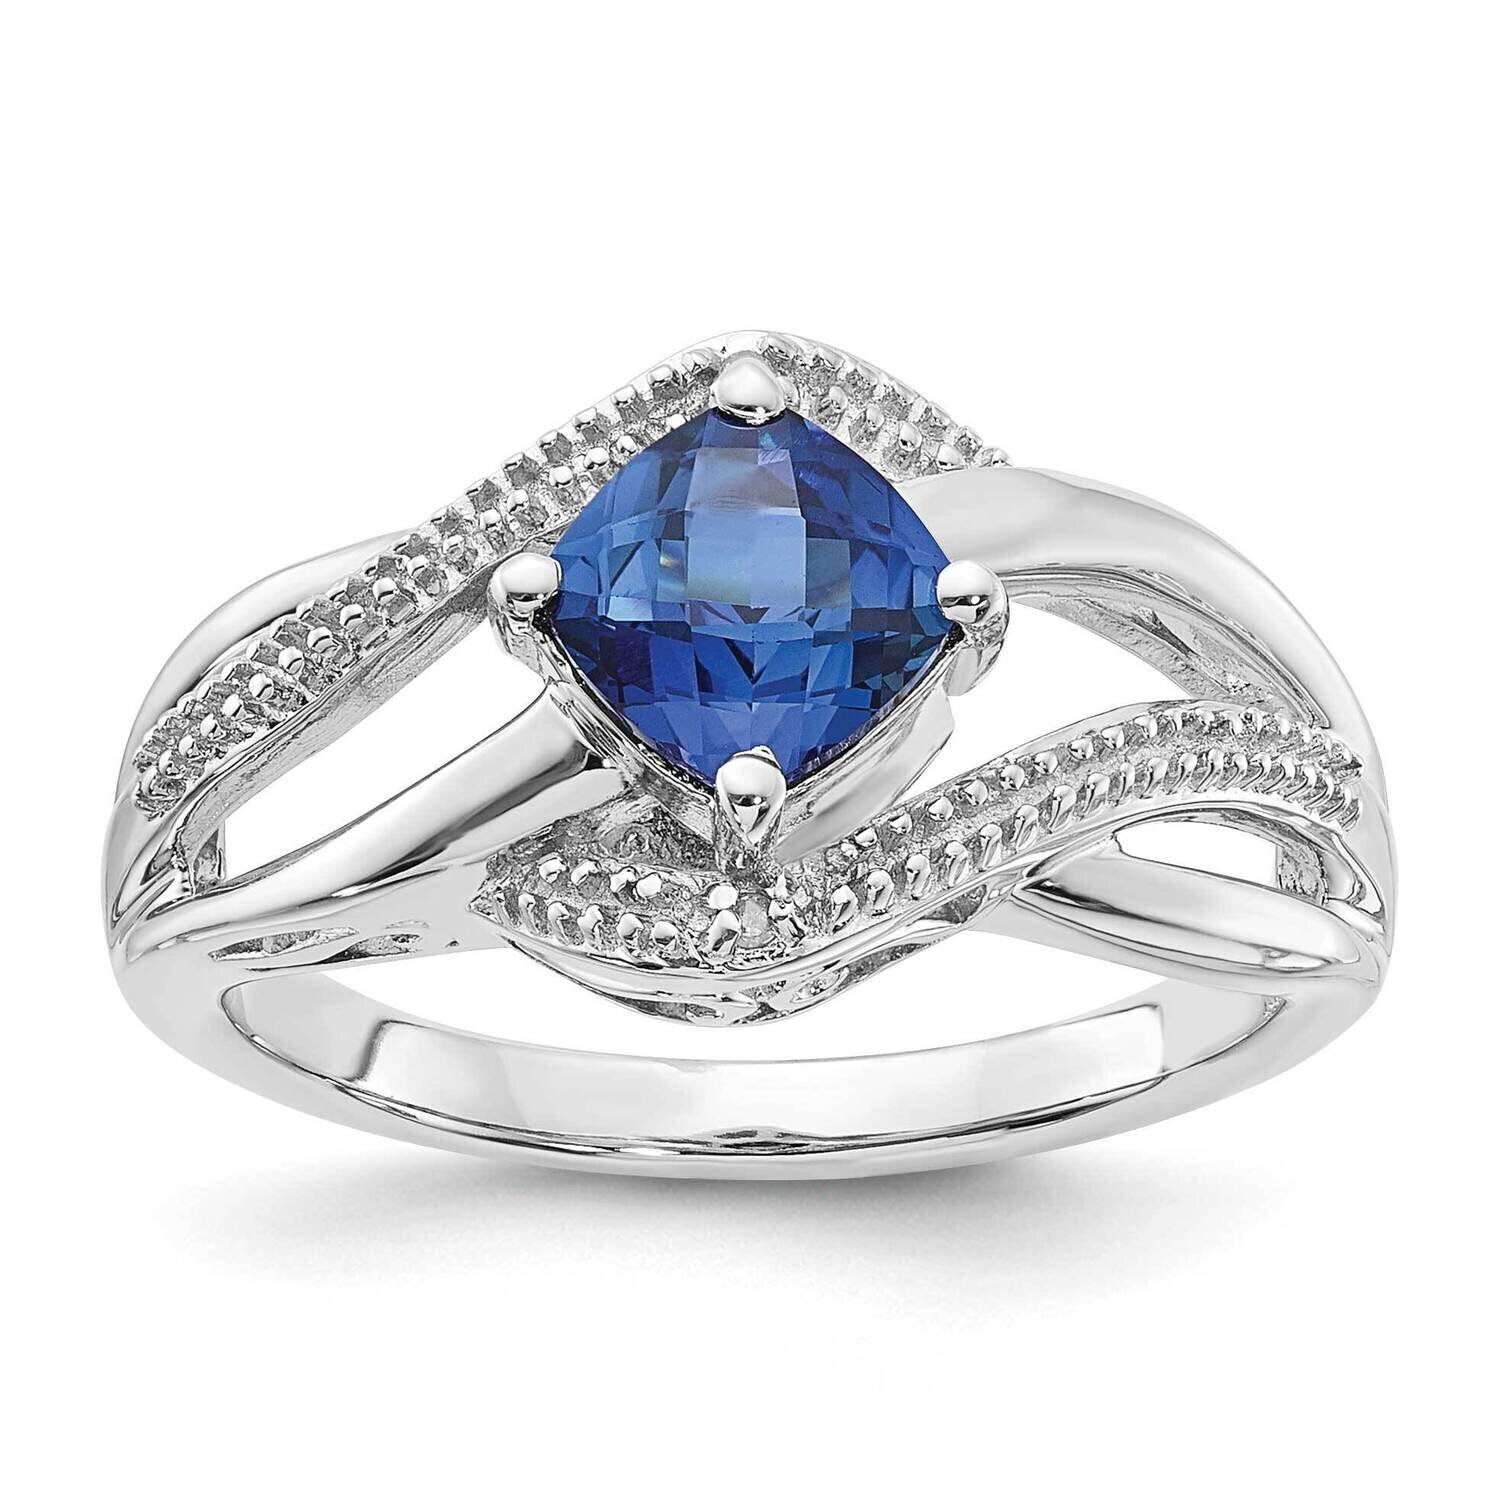 Sterling Silver Created Ceylon Sapphire and Diamond Ring RLS6259/CRCEY-SSAS53